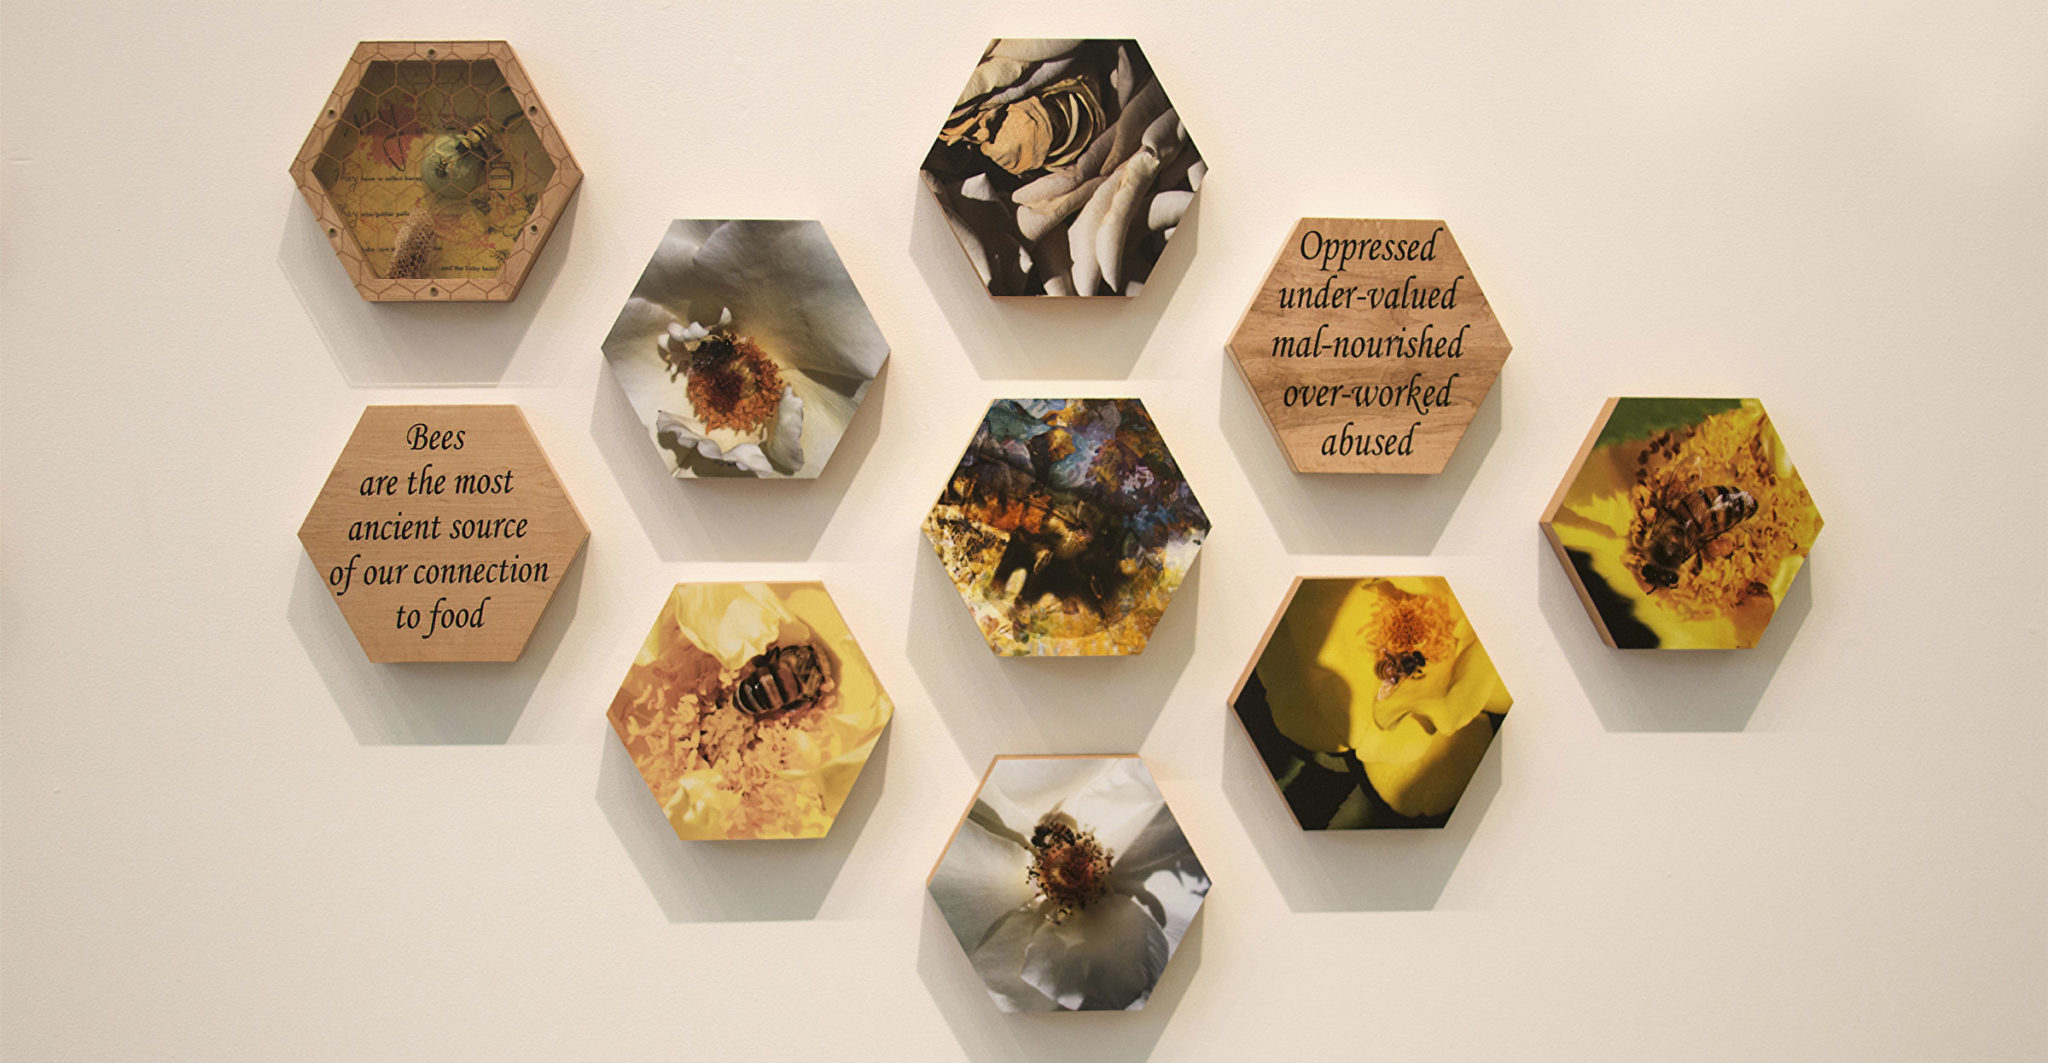 Nancy Macko
<em><strong><br>Honey Teachings: In the Mother Tongue of the Bees (Detail)</strong>, </em>2015<br>
Mixed media, archival digital prints, vinyl signage affixed to 105 hexagonal panels (cumala, bird’s eye maple, yellowheart, birchwood plywood)<br>
144 x 240 inches <em><br></em></p>